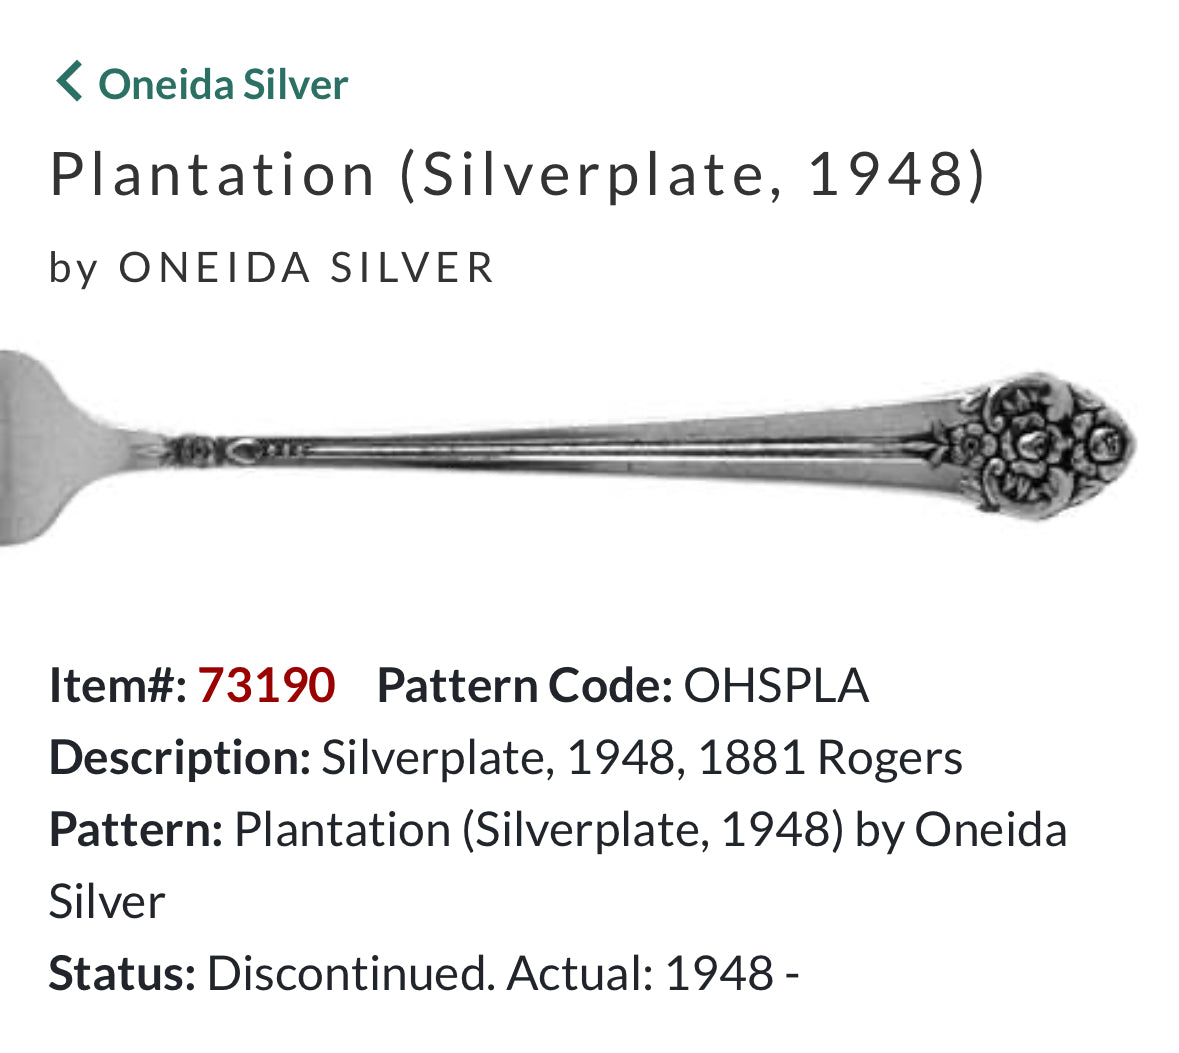 “Plantation” with Tiny Heart Charm - 1948 Spoon Bracelet | Vintage Silverware | Oneida | Up-Cycled Antique Silverware Spoon Bracelet